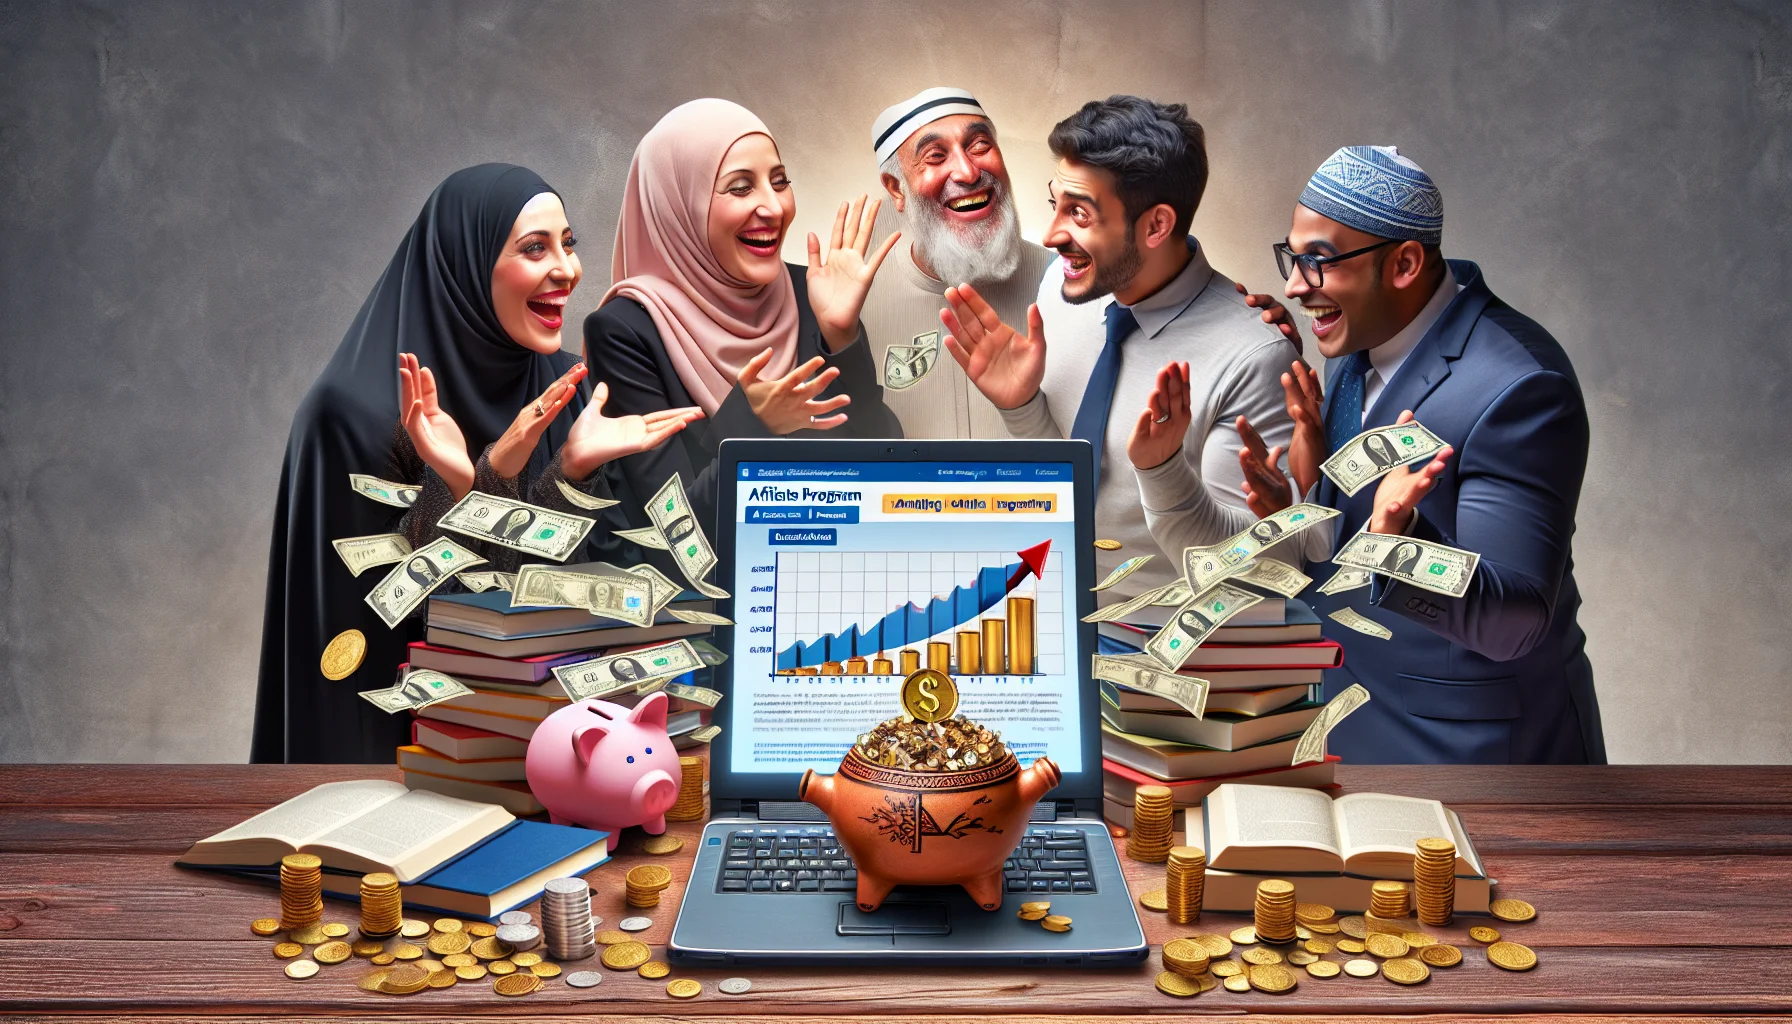 Generate a humorous, lifelike scene revolving around an imagined affiliate program by a major chain bookstore. Depict the program as a captivating online money-making opportunity. Show a diverse range of people - a Middle Eastern woman and a South Asian man - excitedly discussing their earnings around a laptop, displaying graphs of rising income. The website on the laptop screen promotes the program. In the background, stacks of books symbolizing the bookstore angle. Also, include a piggy bank overflowing with gold coins, analogizing the lucrative potential of the program.